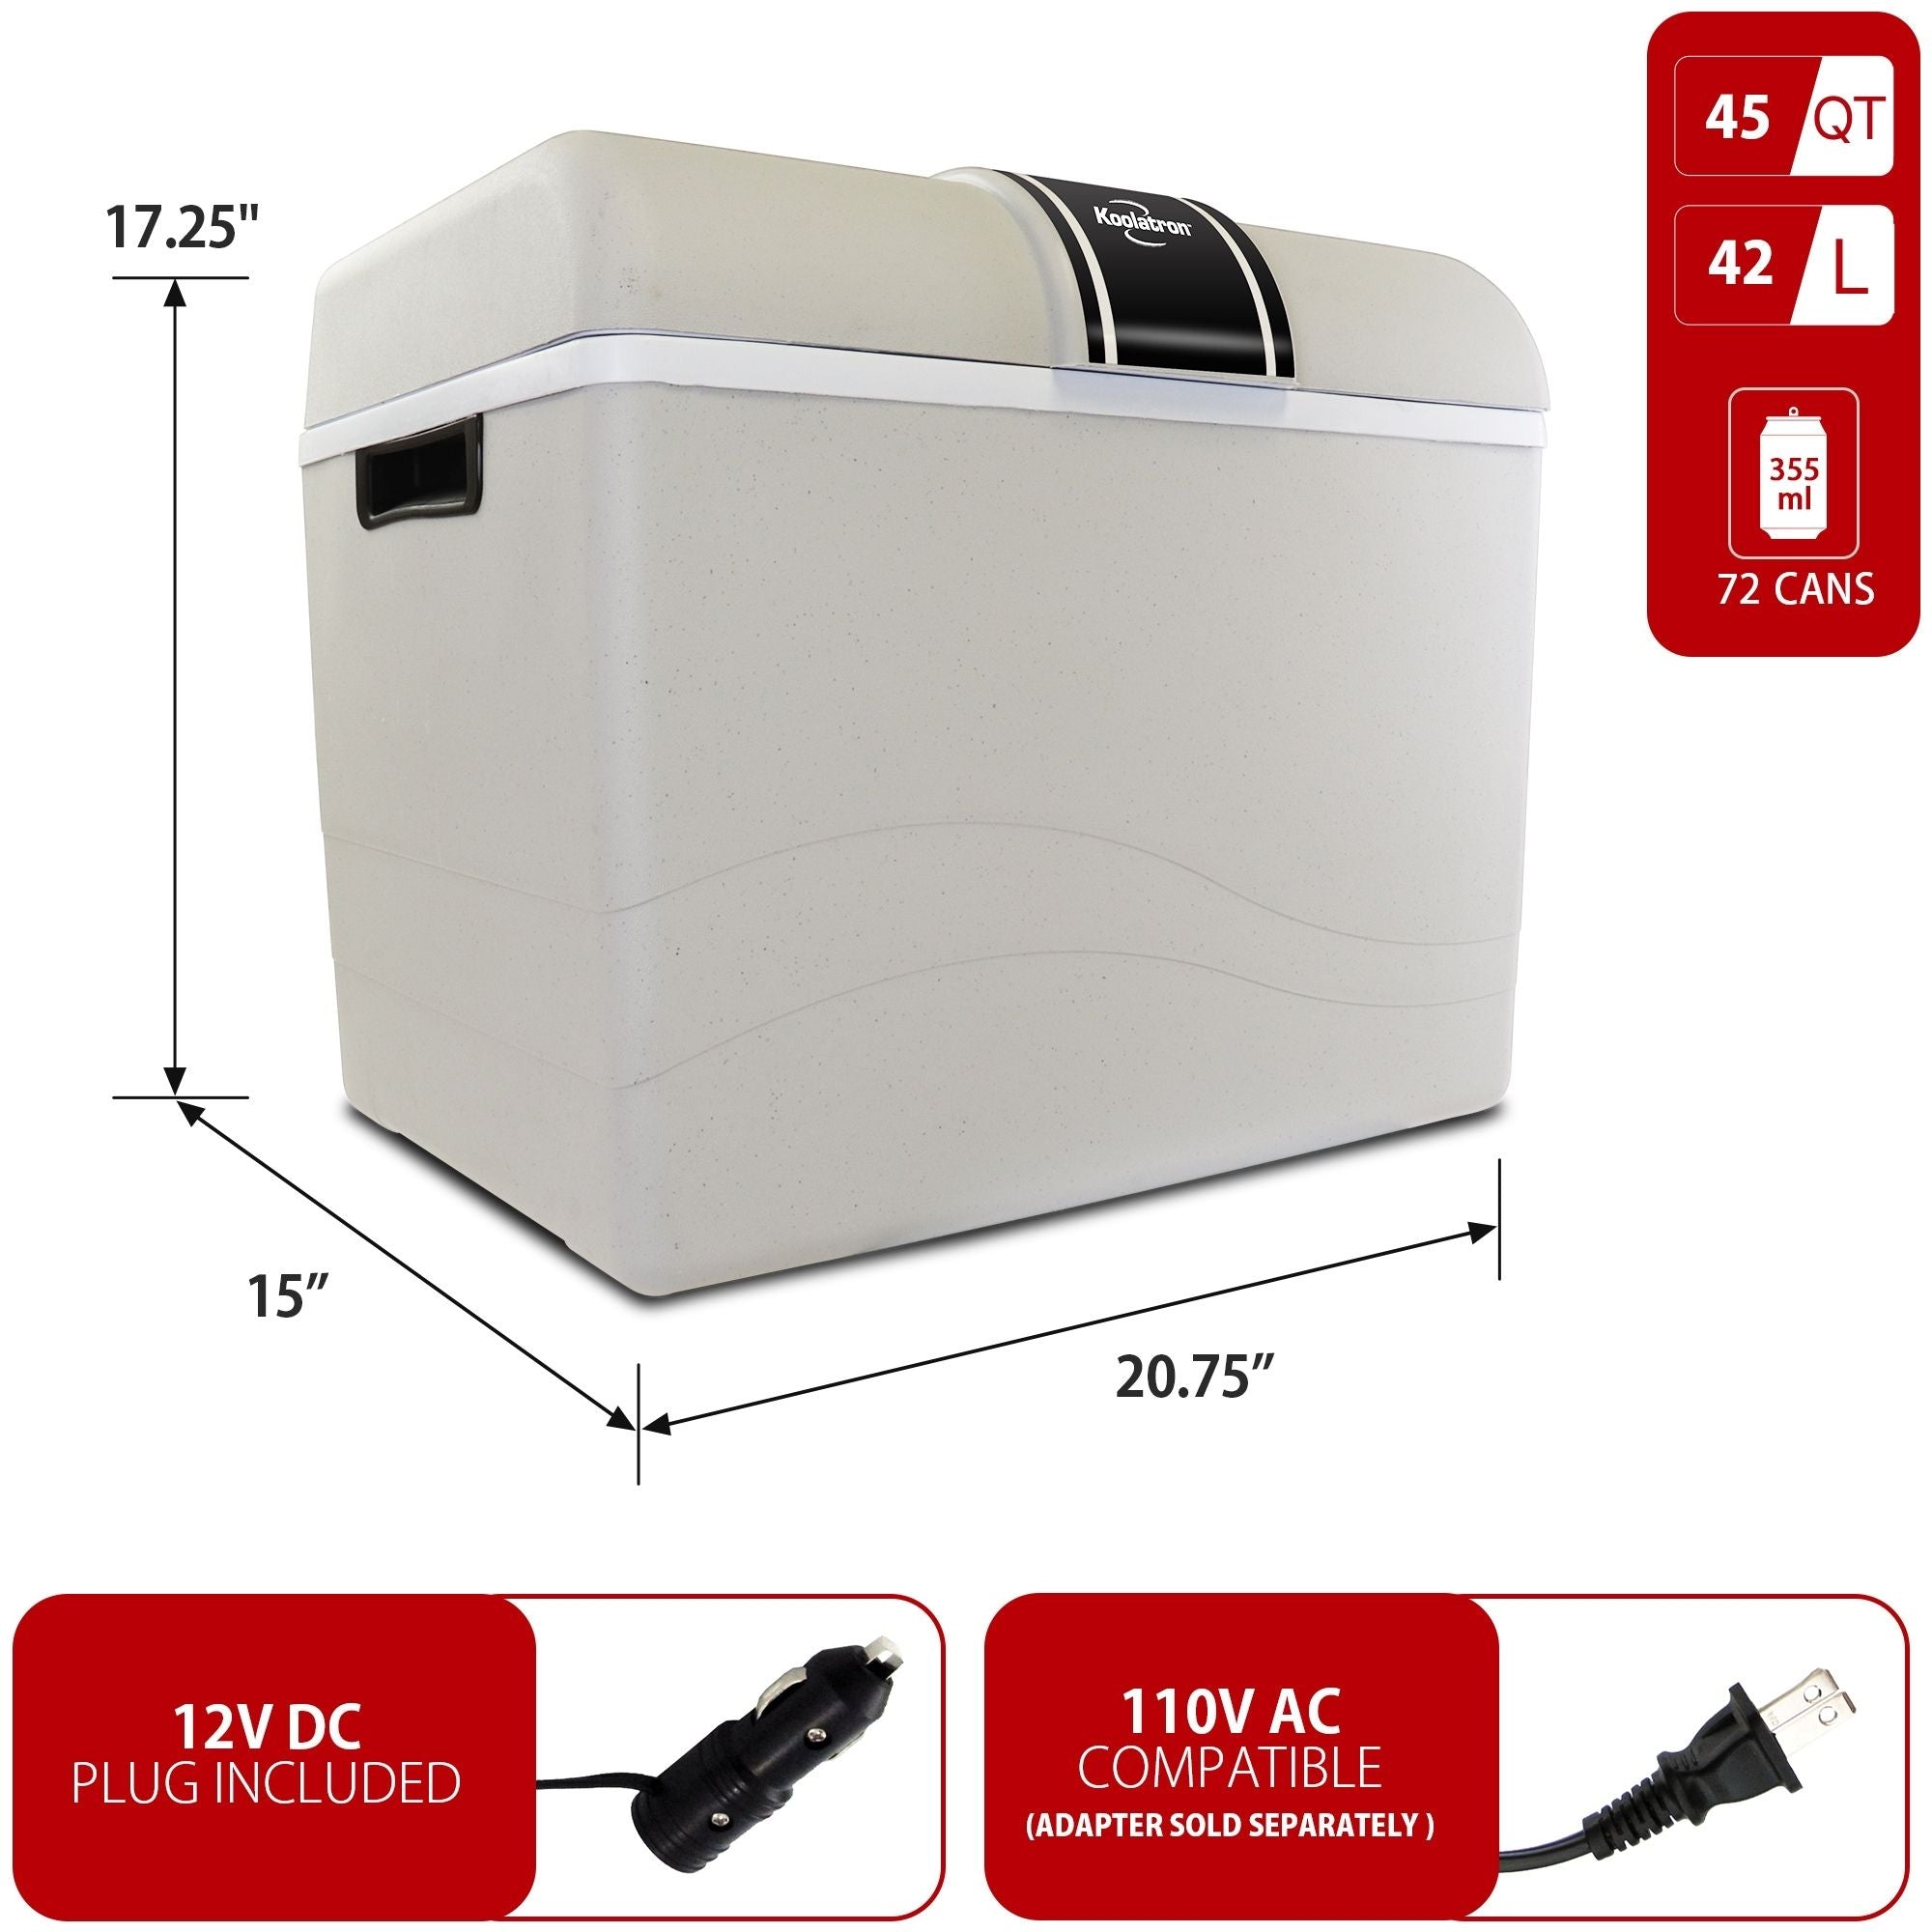 Koolatron 12V travel fridge/warmer, closed on a white background with dimensions and capacity labeled. Two inset images below show power adapters with text reading "12V DC plug included; AC compatible (adapter sold separately)"